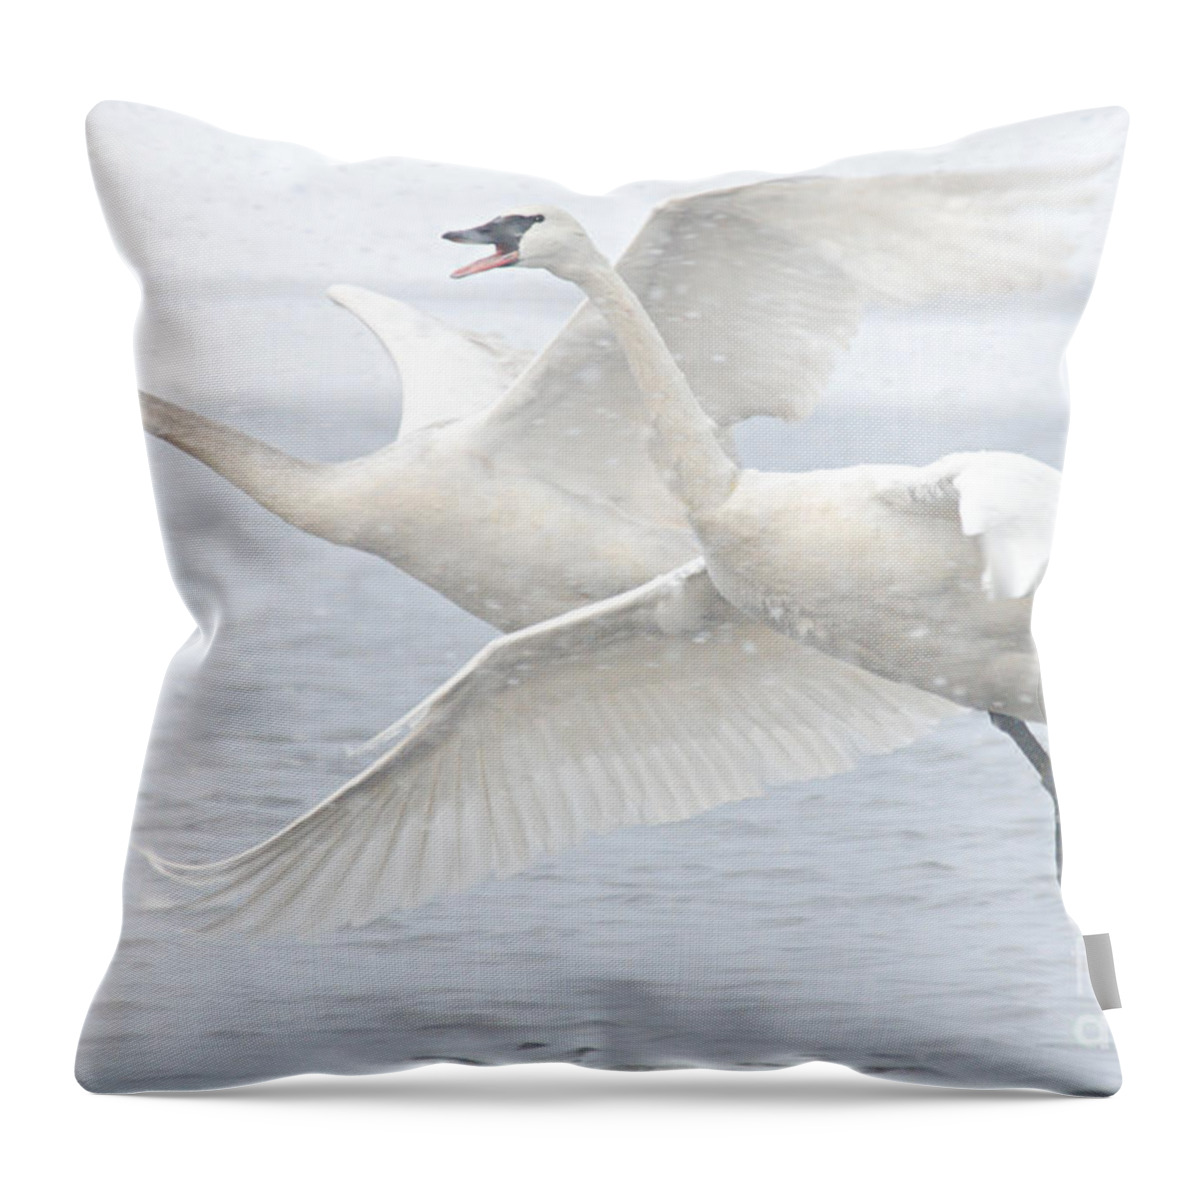 Photography Throw Pillow featuring the photograph Landing in the Snow by Larry Ricker